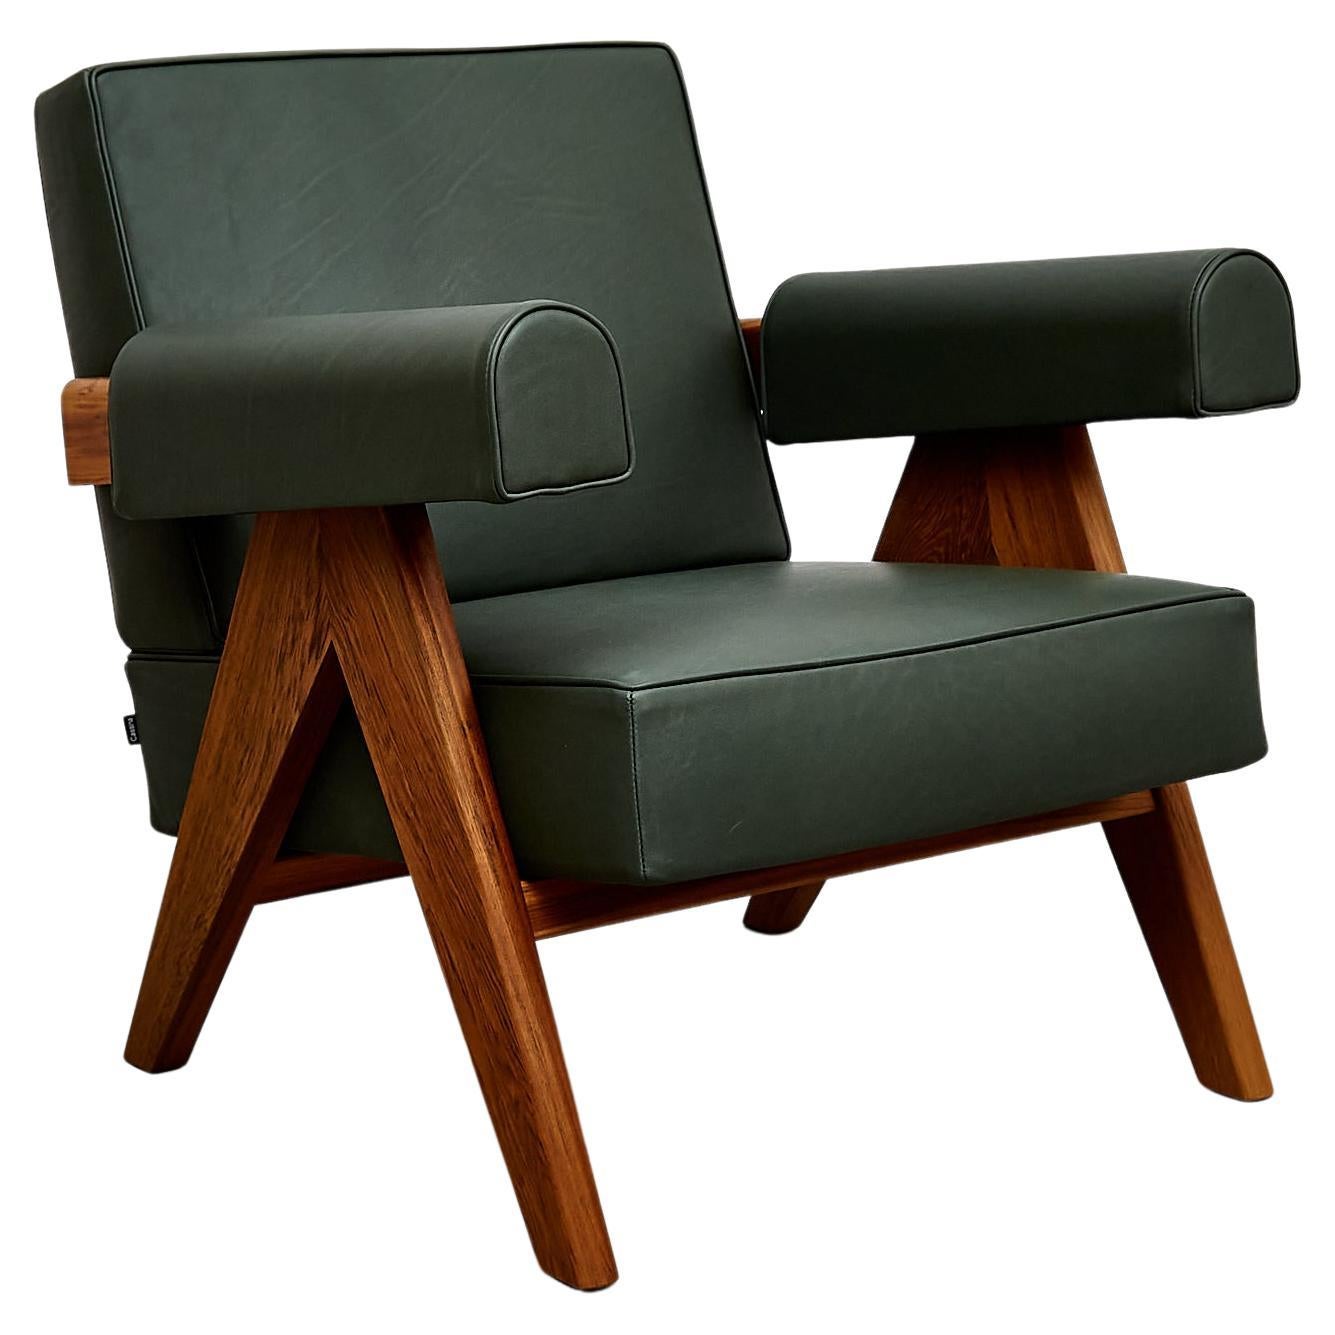 Experience timeless elegance and exceptional craftsmanship with the Pierre Jeanneret Armchair, originally designed circa 1950 and relaunched in 2019. Manufactured by Cassina in Italy, this iconic piece showcases a harmonious blend of teak wood and